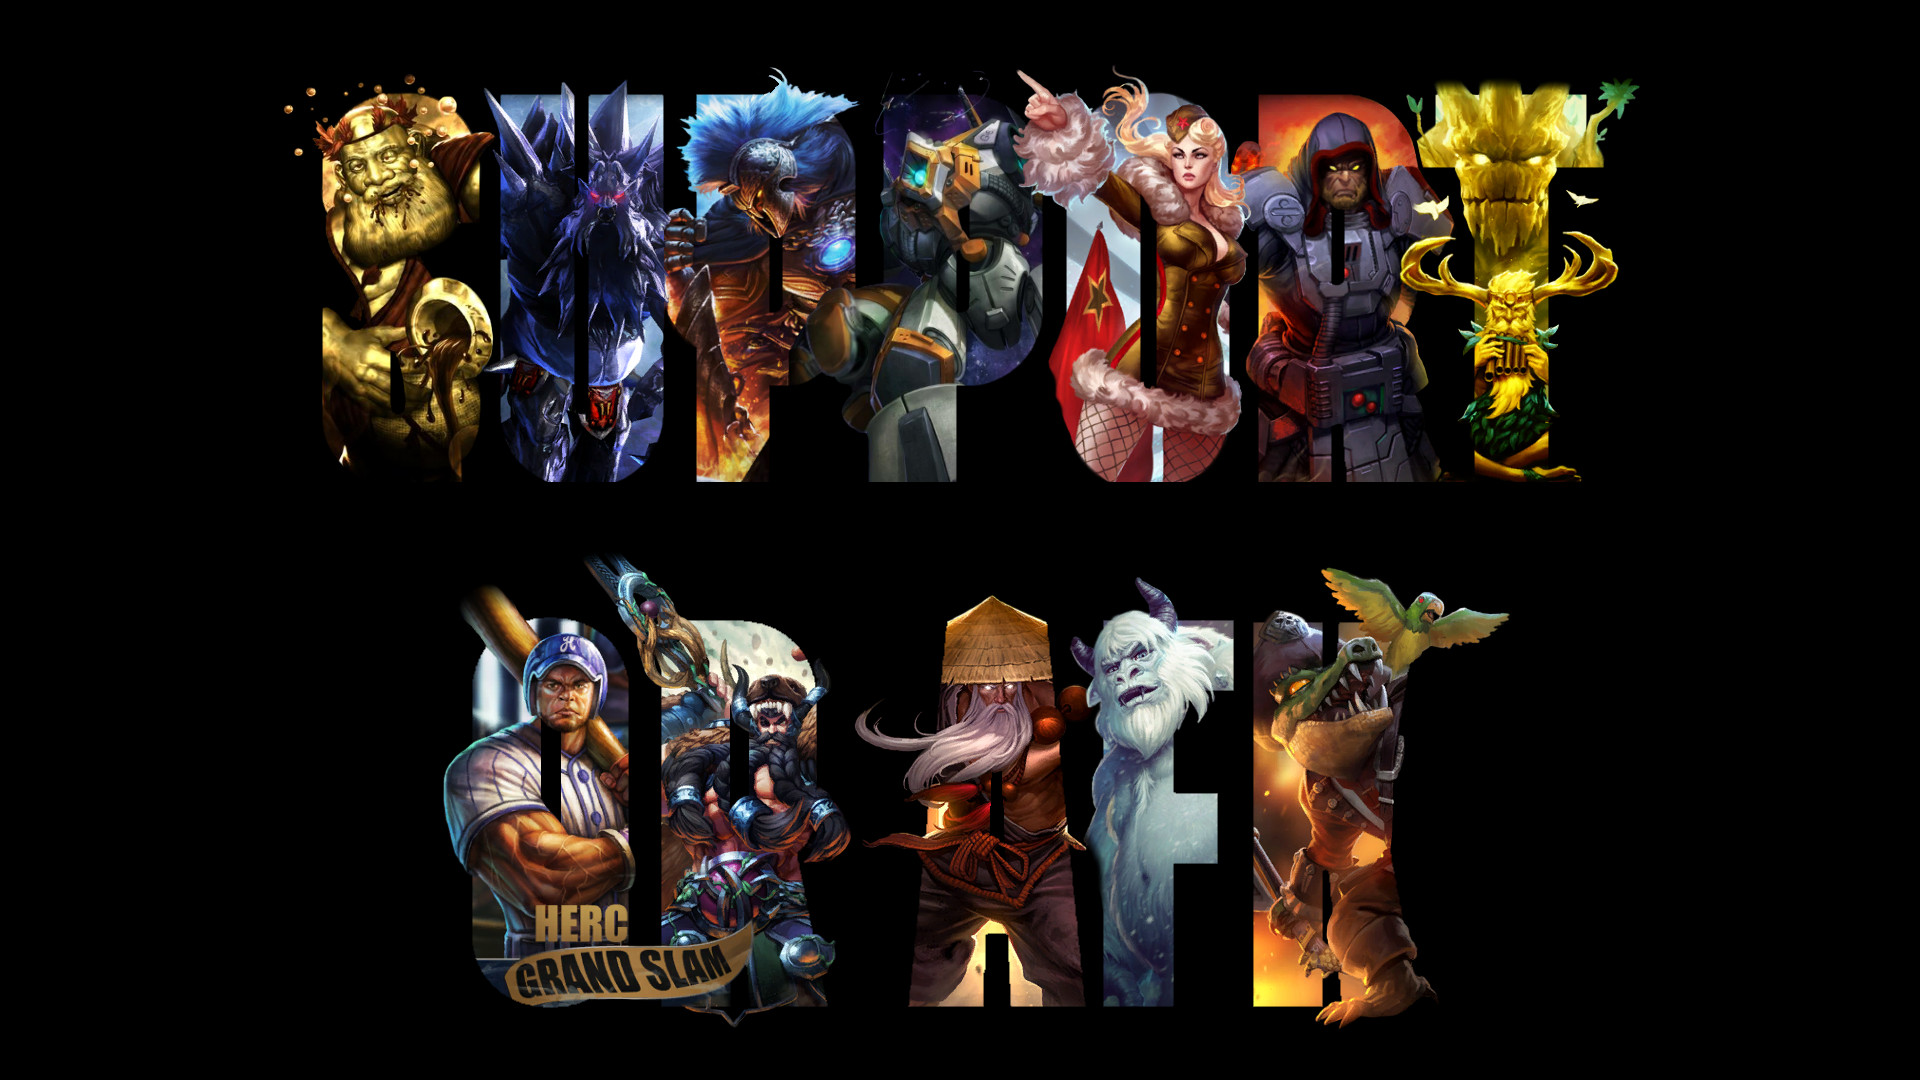 1920x1080 ... Update on wallpaper of Smite supports by iMorallyGrey